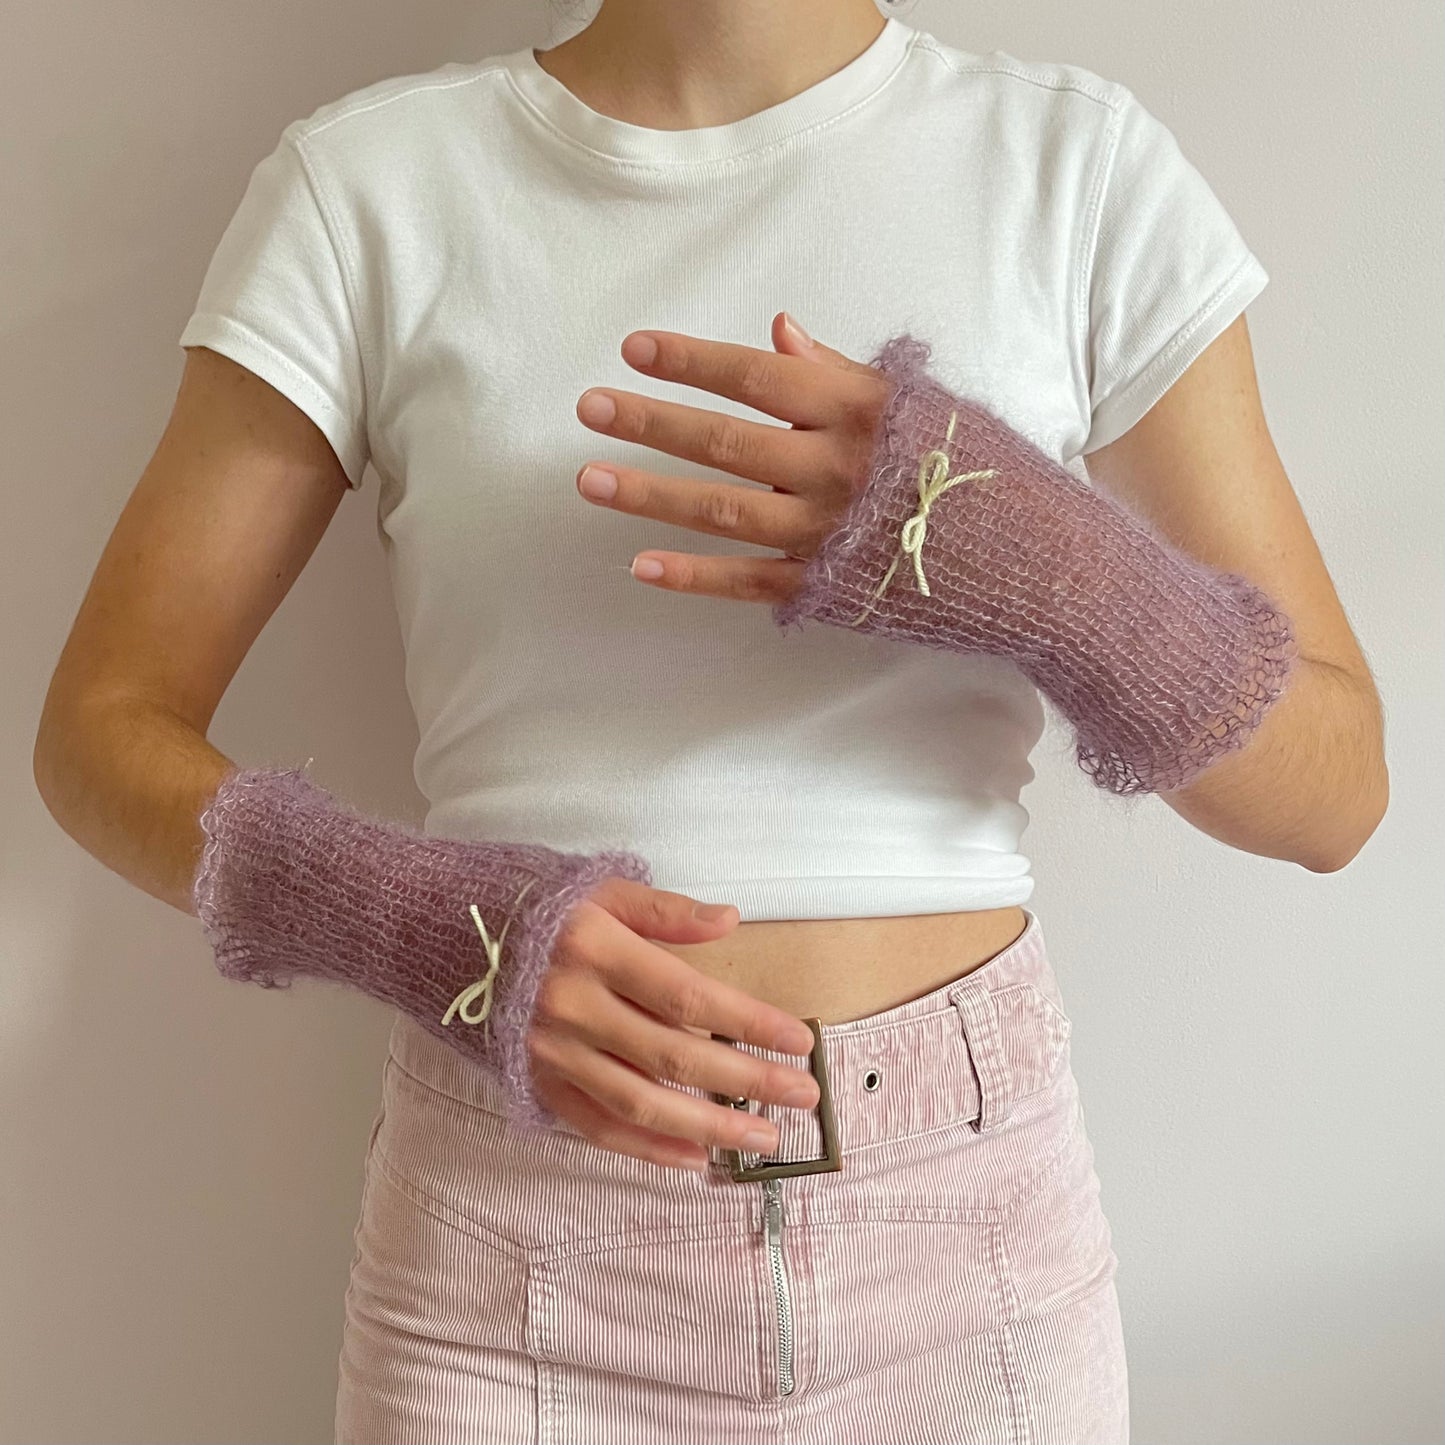 Handmade knitted mohair hand warmers in dusky purple with pastel yellow bow